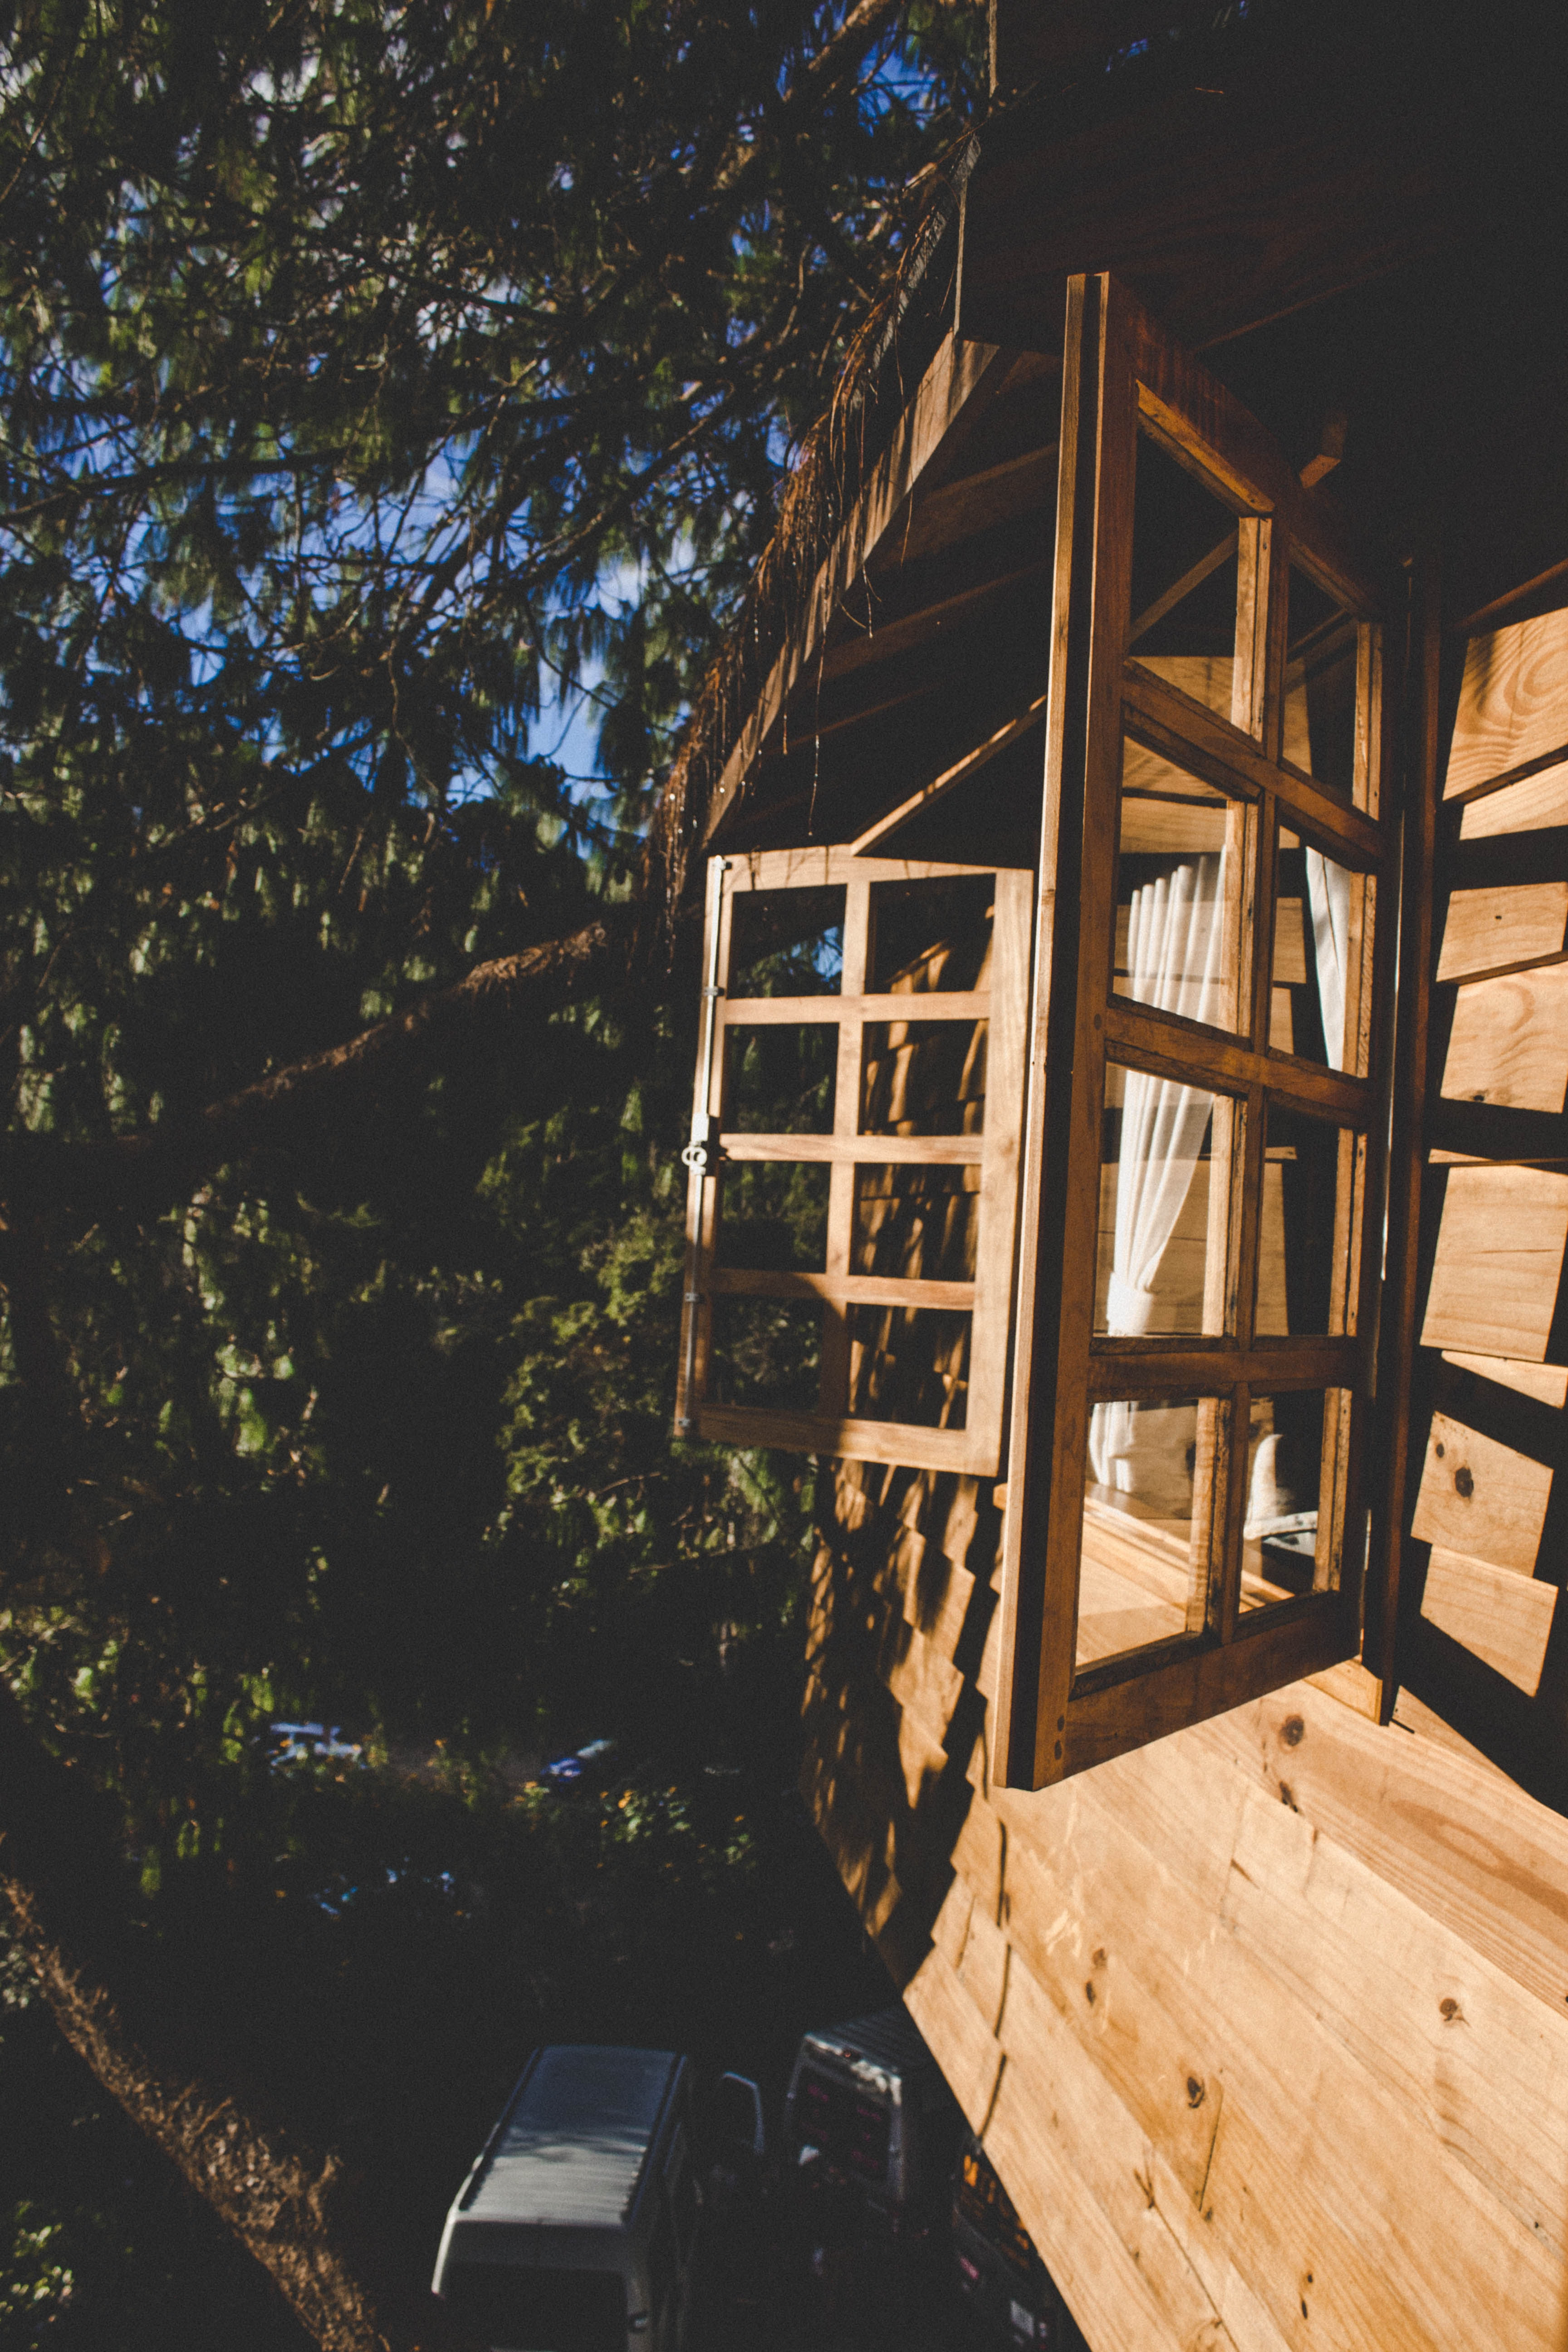 Open window of a timber tiny house by Angela Cavina from Pexels